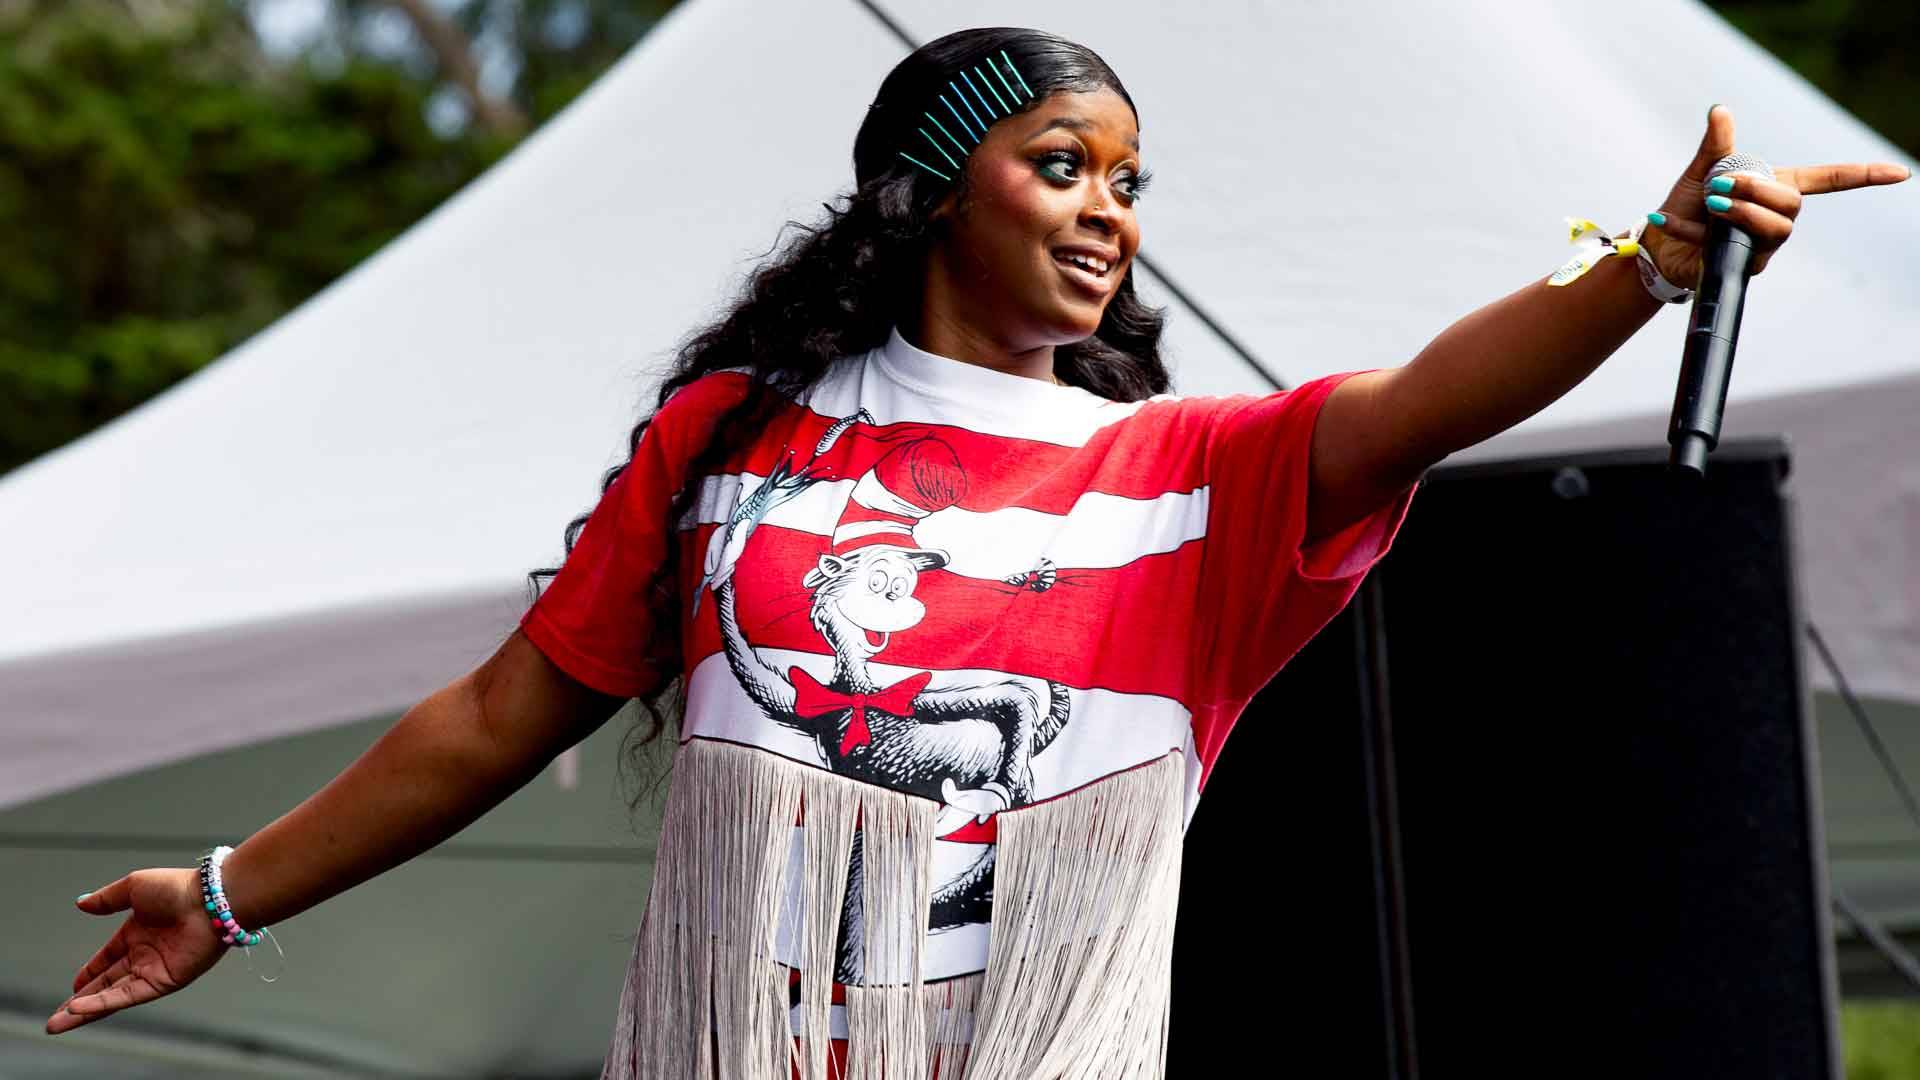 Tierra Whack performs at Outside Lands music festival in San Francisco, Aug. 10, 2019. Estefany Gonzalez